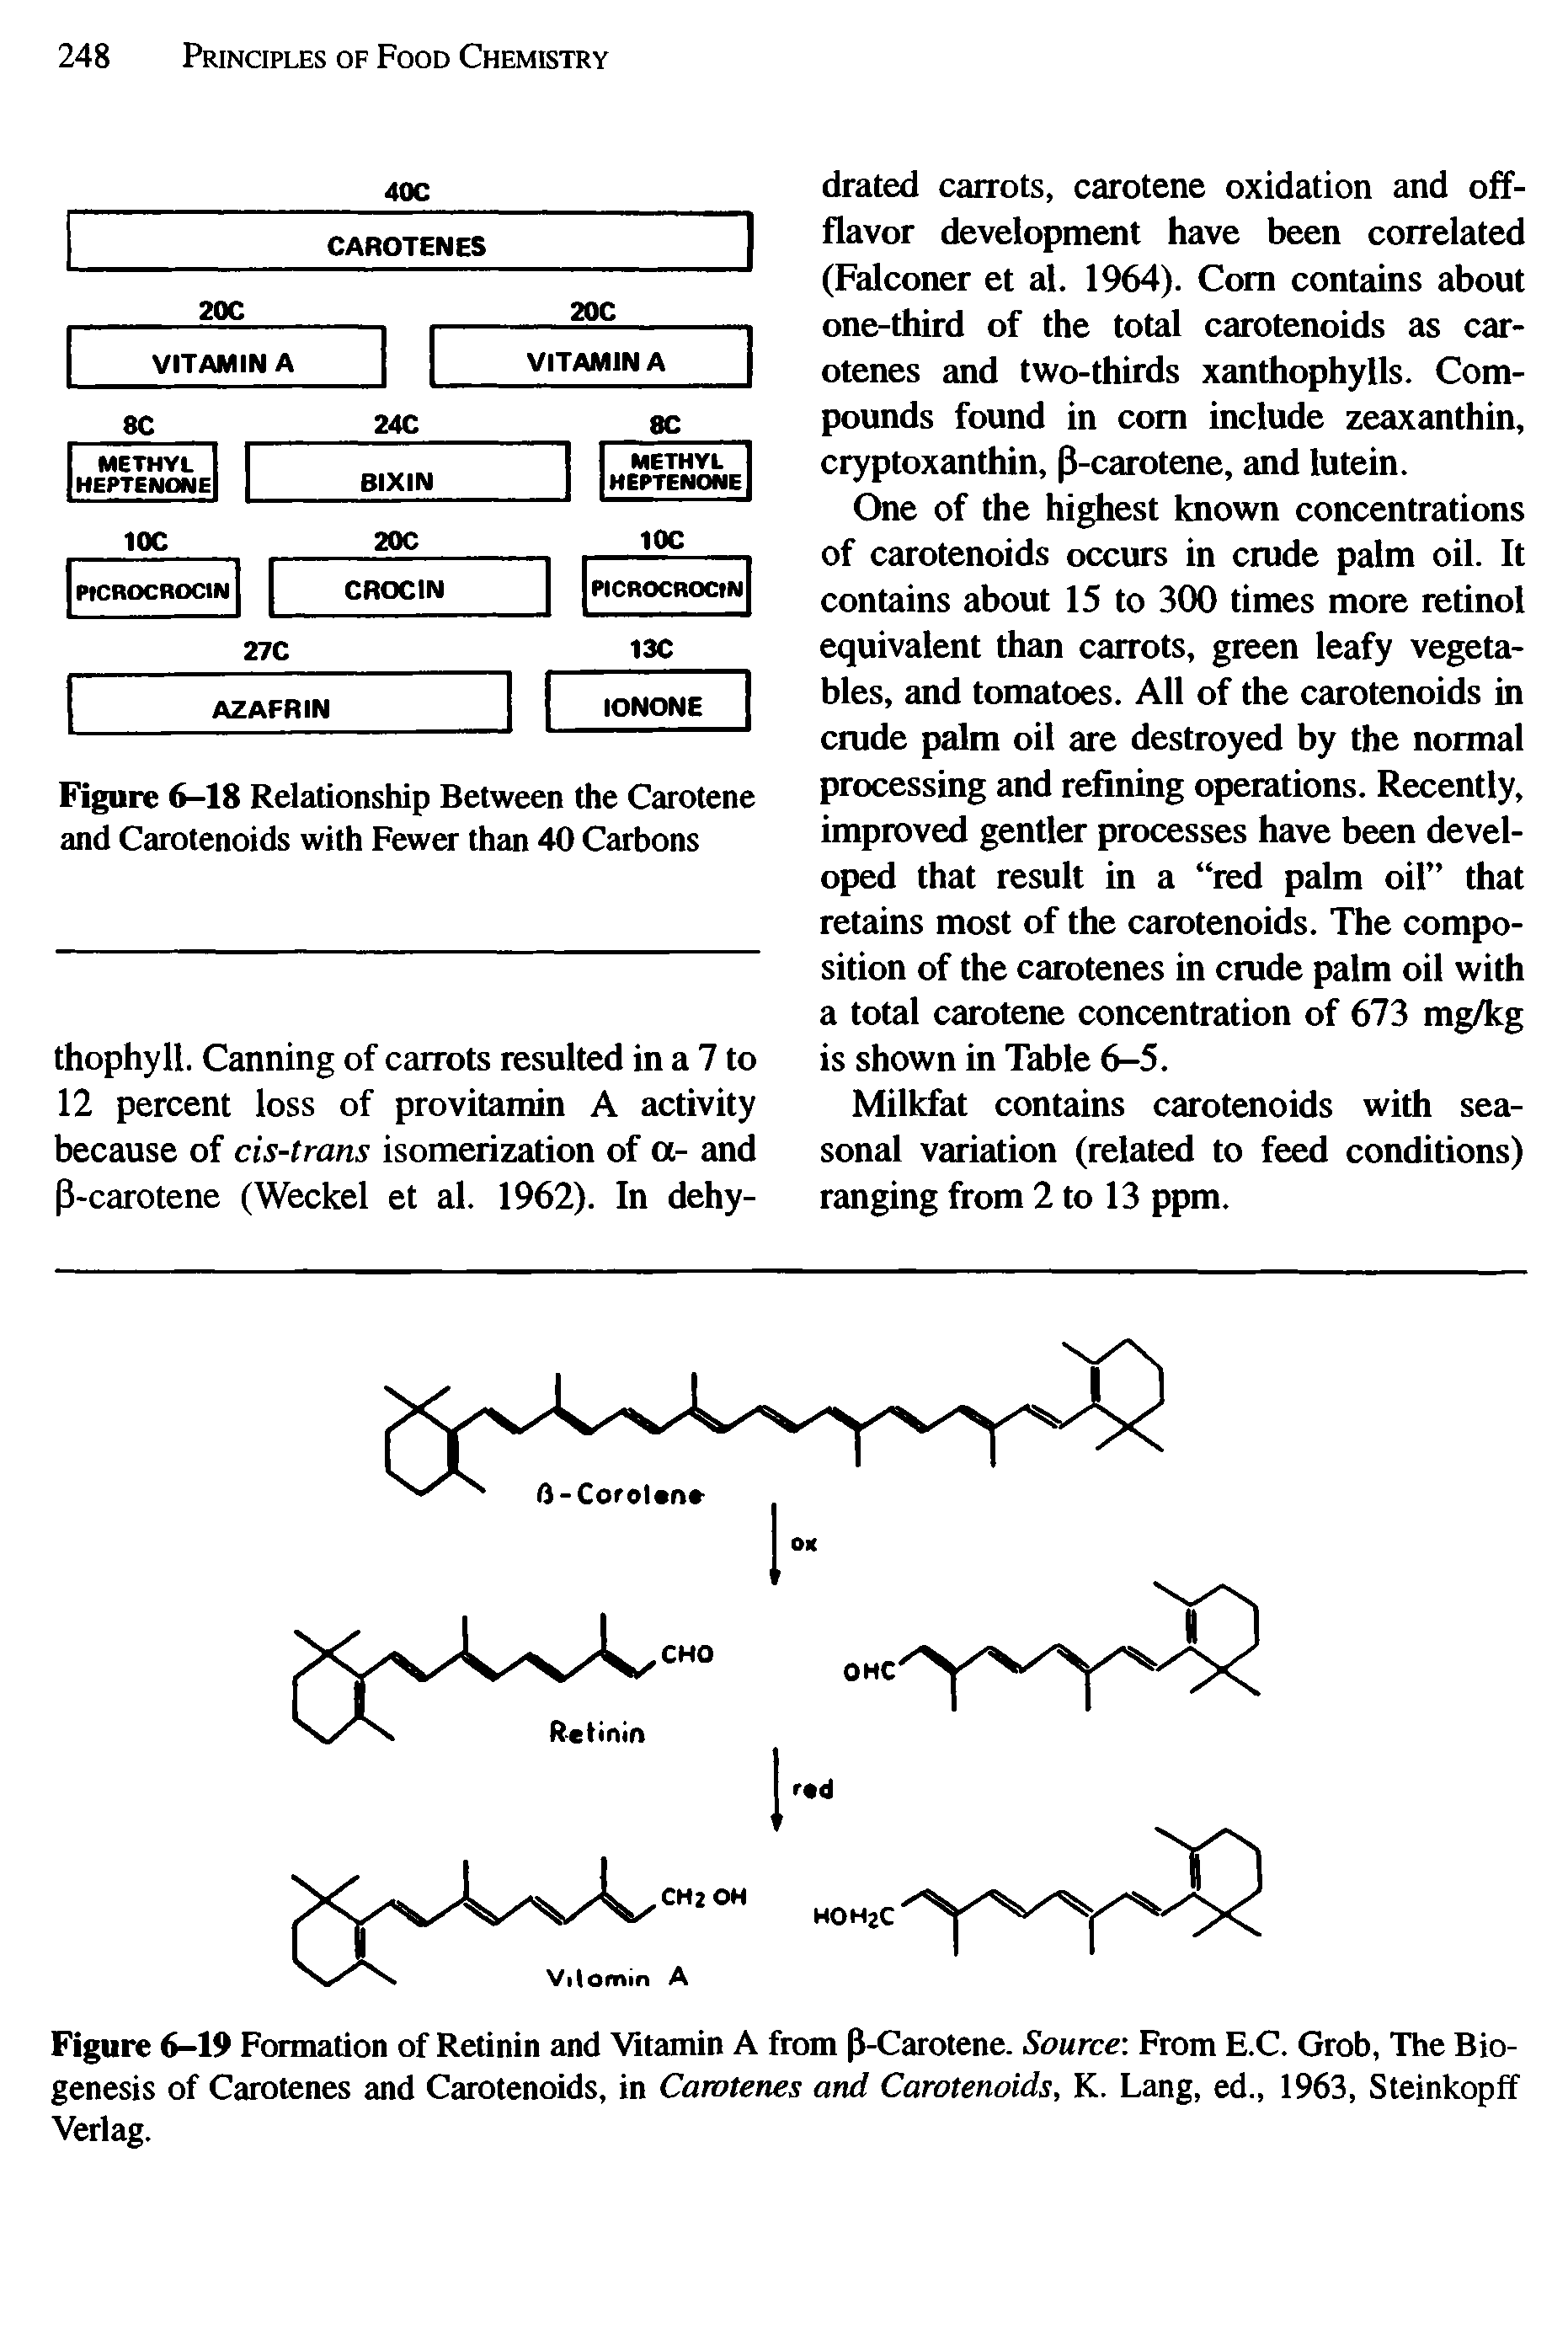 Figure 6-19 Formation of Retinin and Vitamin A from p-Carotene. Source From E.C. Grab, The Biogenesis of Carotenes and Carotenoids, in Carotenes and Carotenoids, K. Lang, ed., 1963, Steinkopff Verlag.